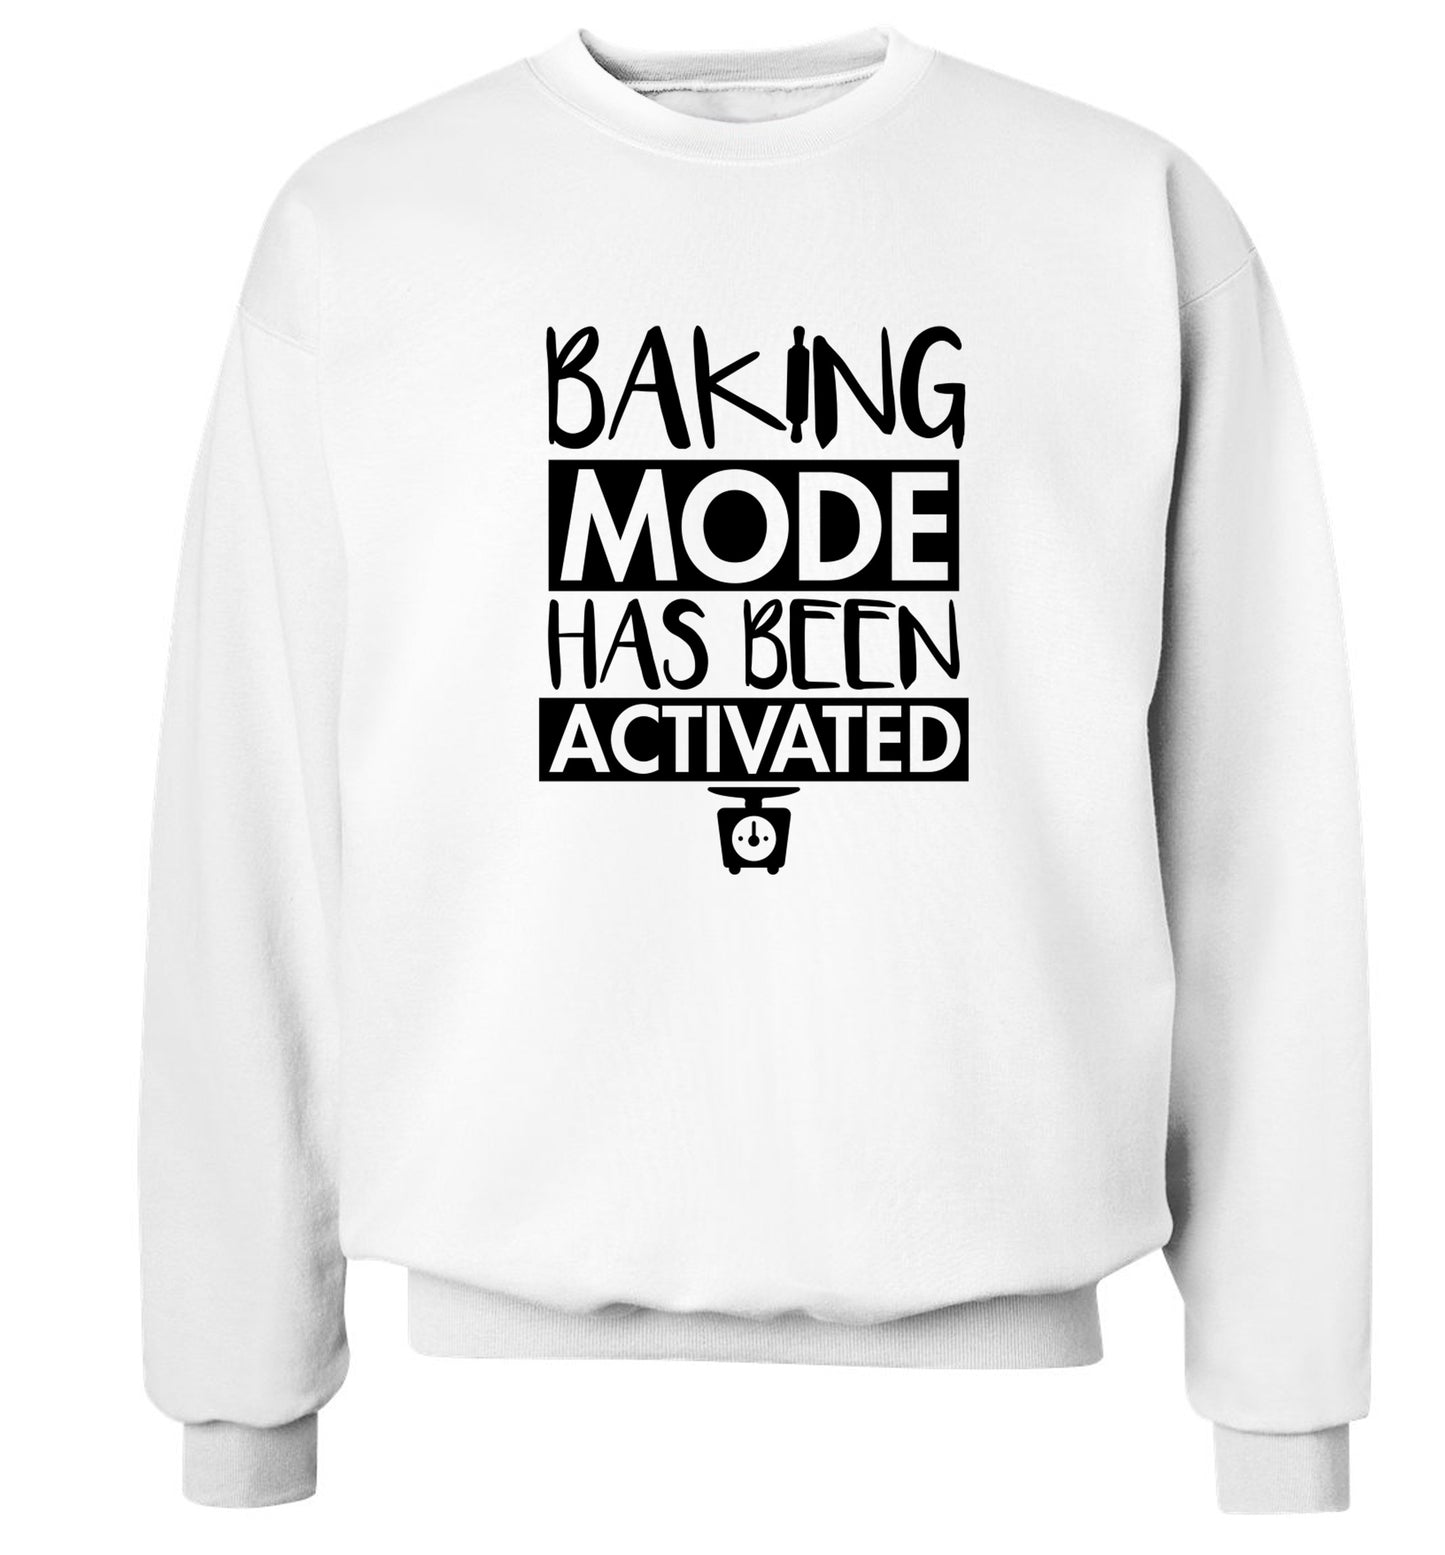 Baking mode has been activated Adult's unisex white Sweater 2XL